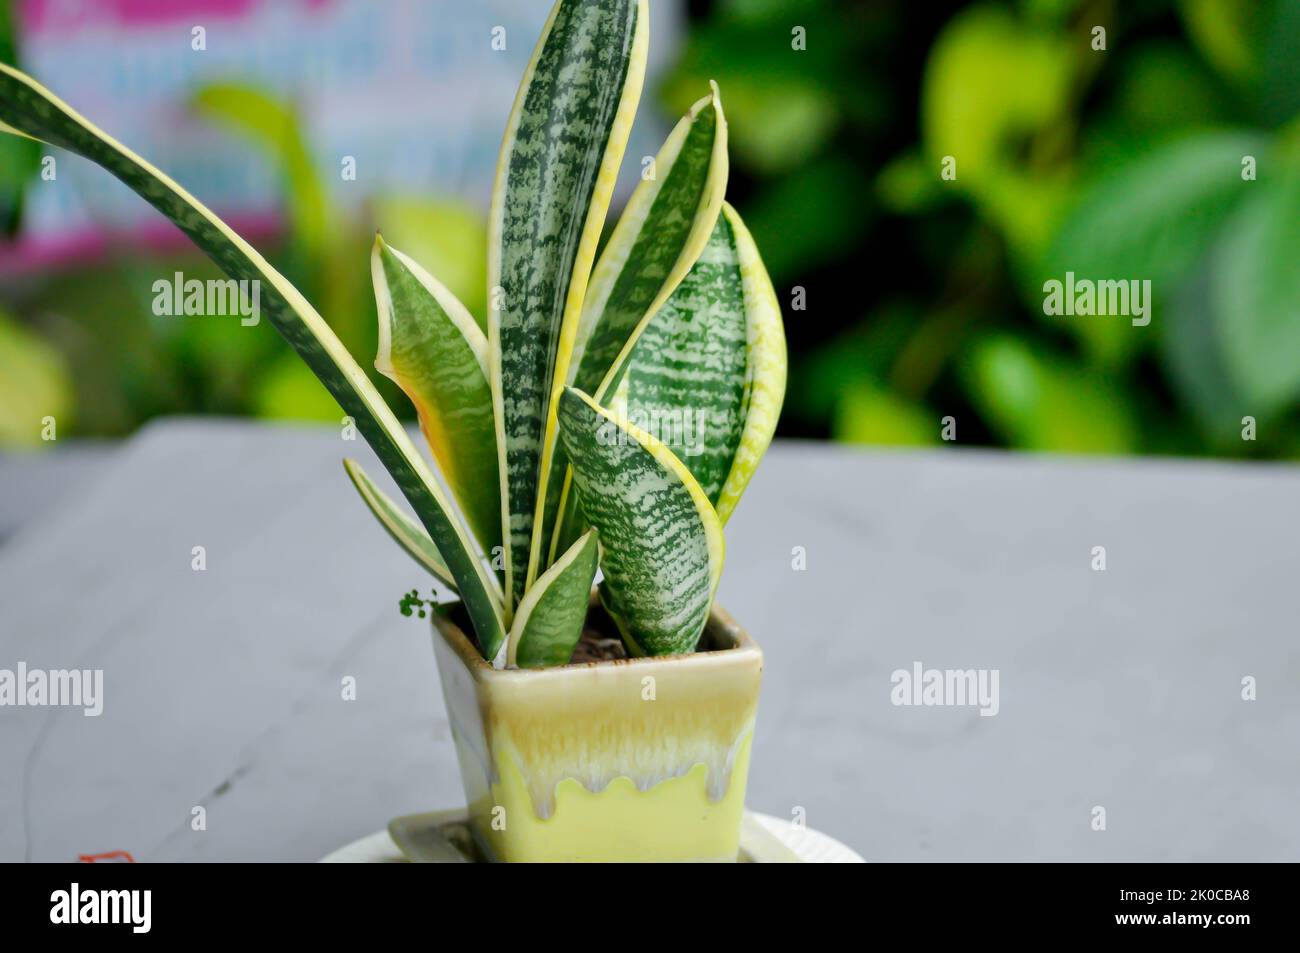 Sansevieria trifasciata Prain, Snake plant or Mother in laws tongue in the flower pot Stock Photo